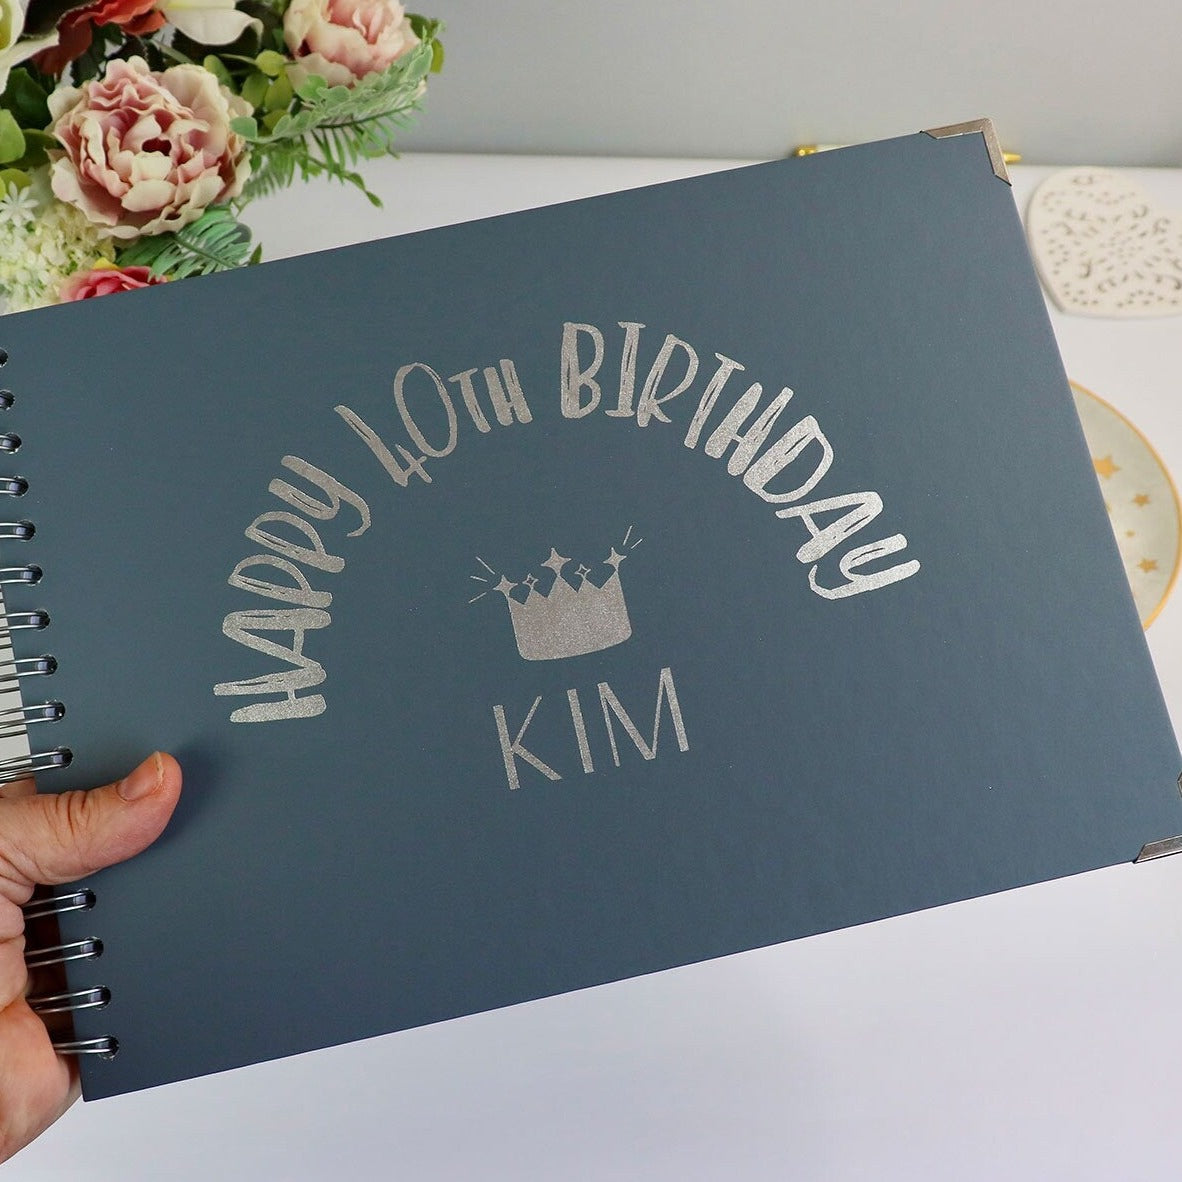 An A4 blue/grey memory book with the words 'Happy 40th birthday Kim' with an image of a crown above the name in silver fo